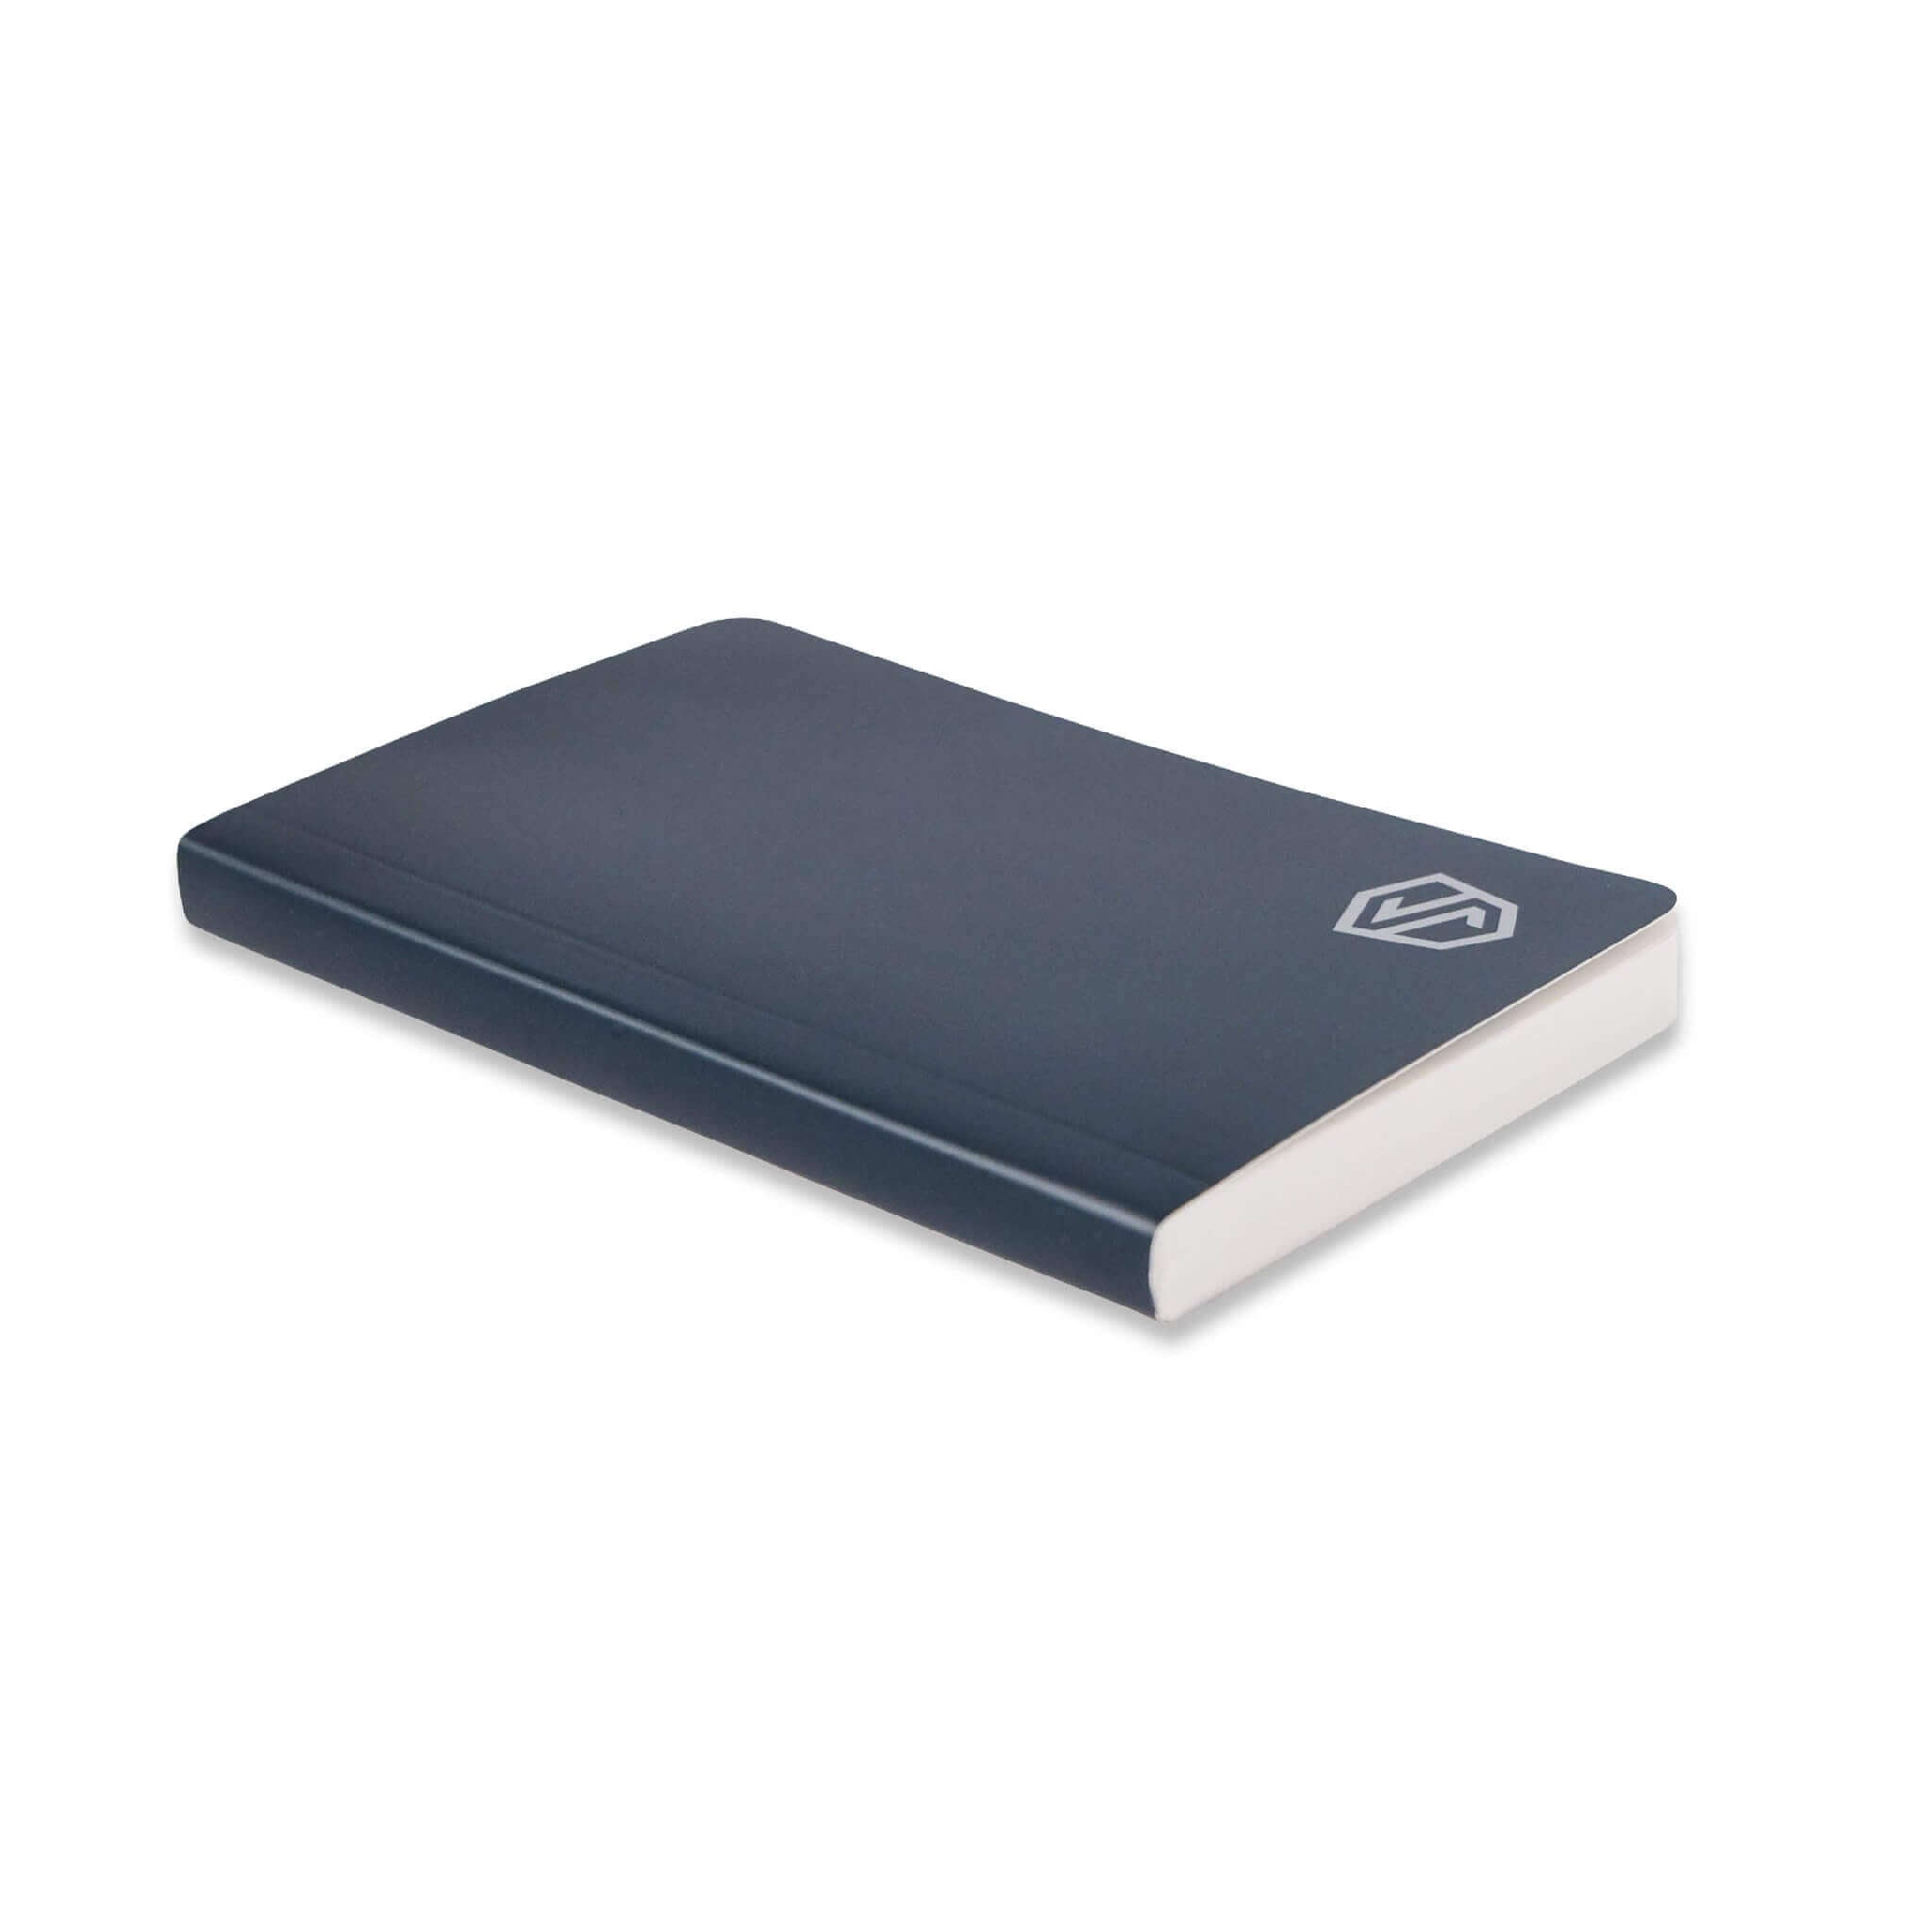 A Stonebook ™ Notebook lying on a white background at an angle